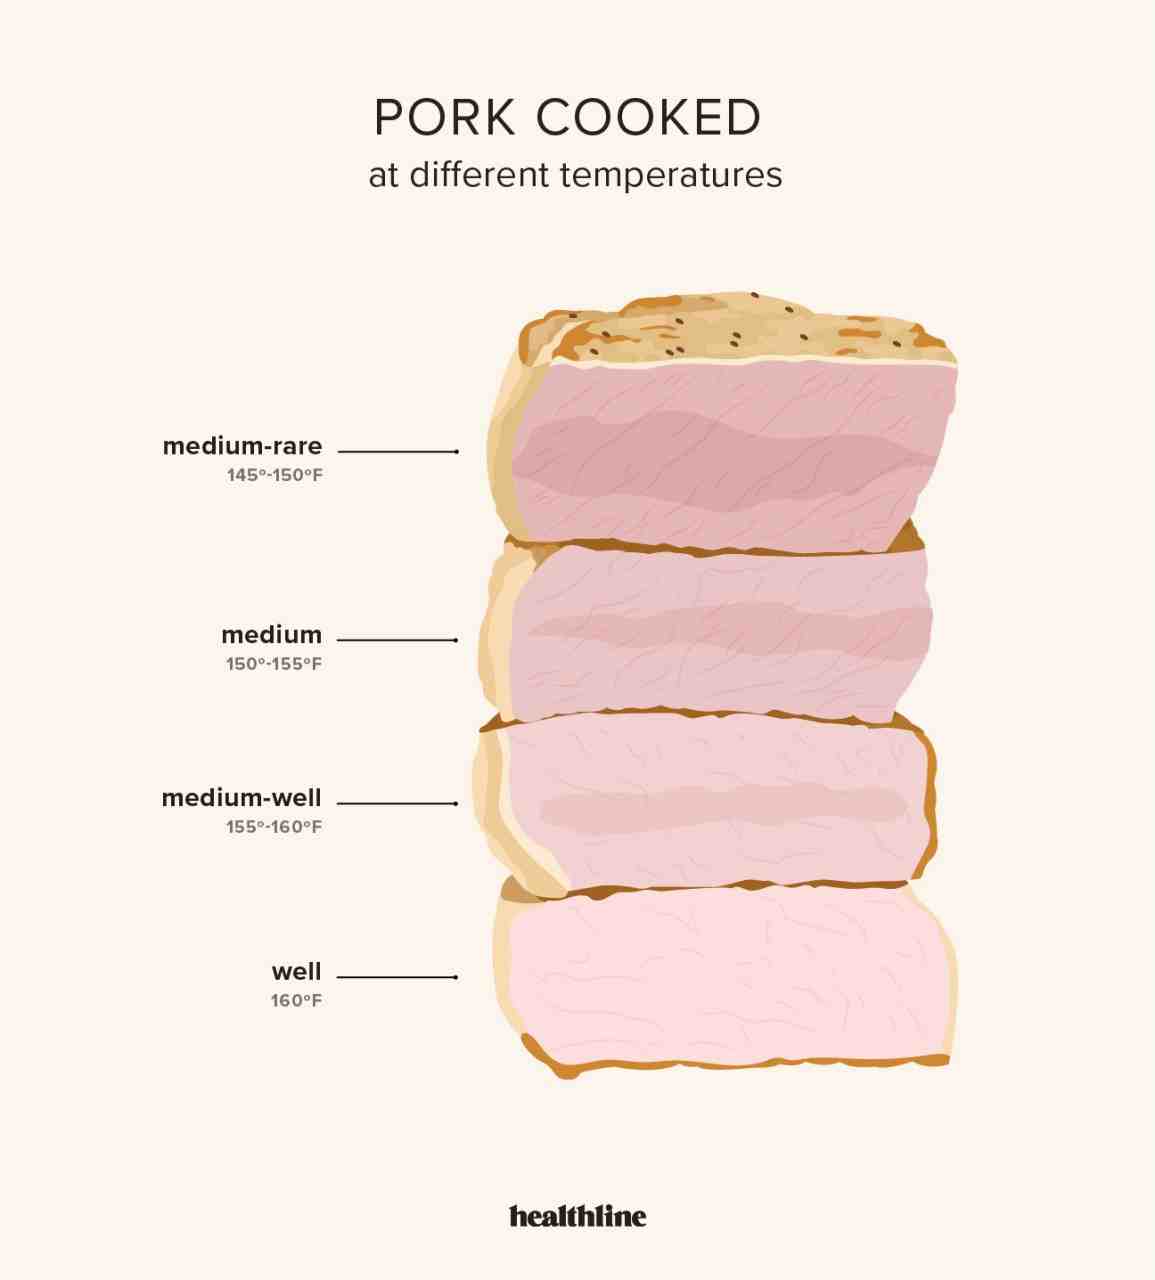 How do you know if pork is undercooked?